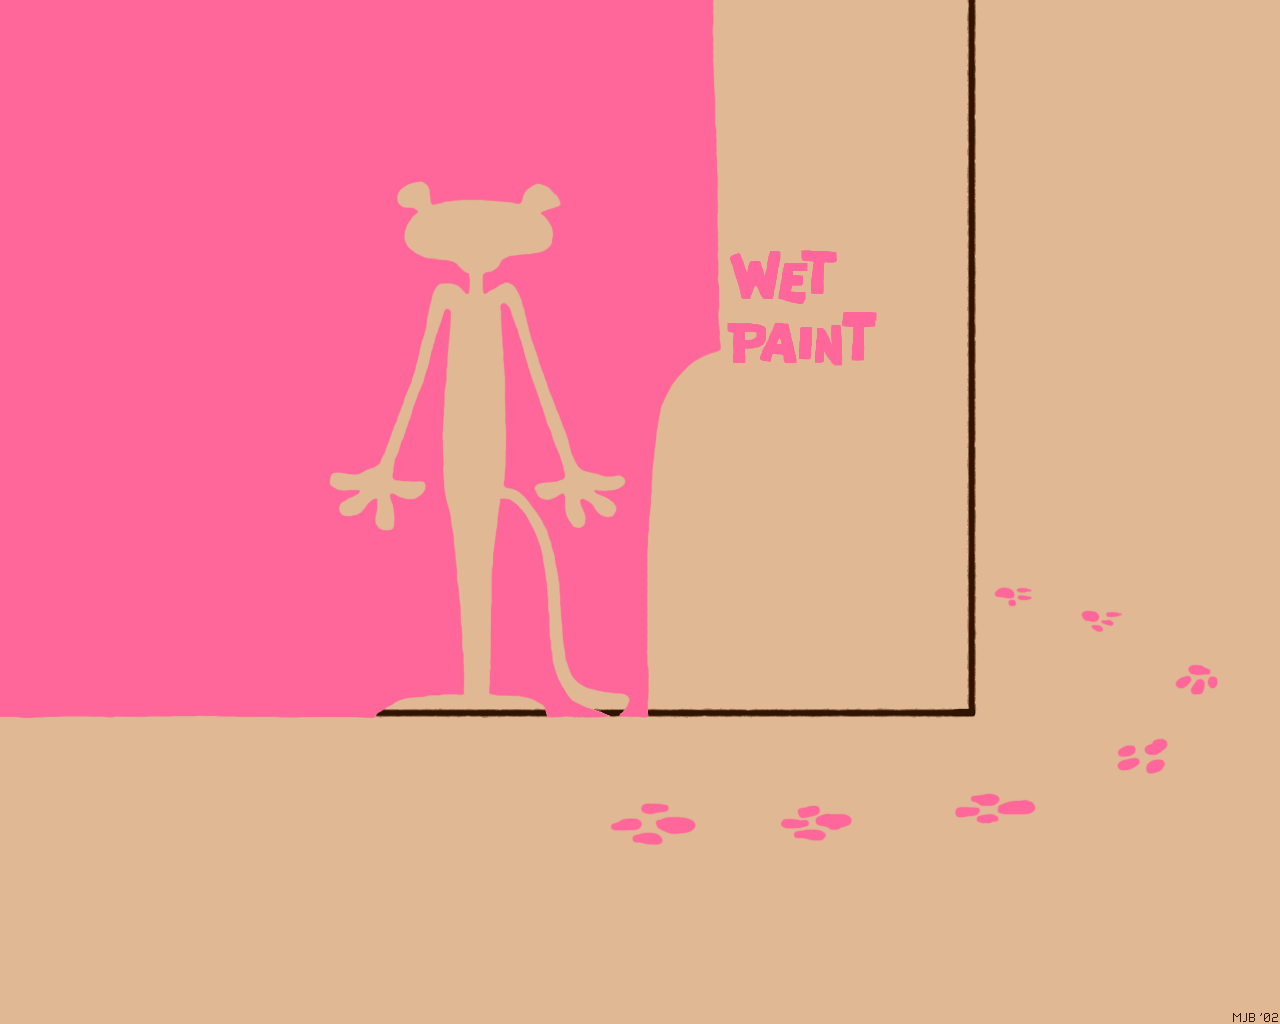 Pink Panther Backgrounds